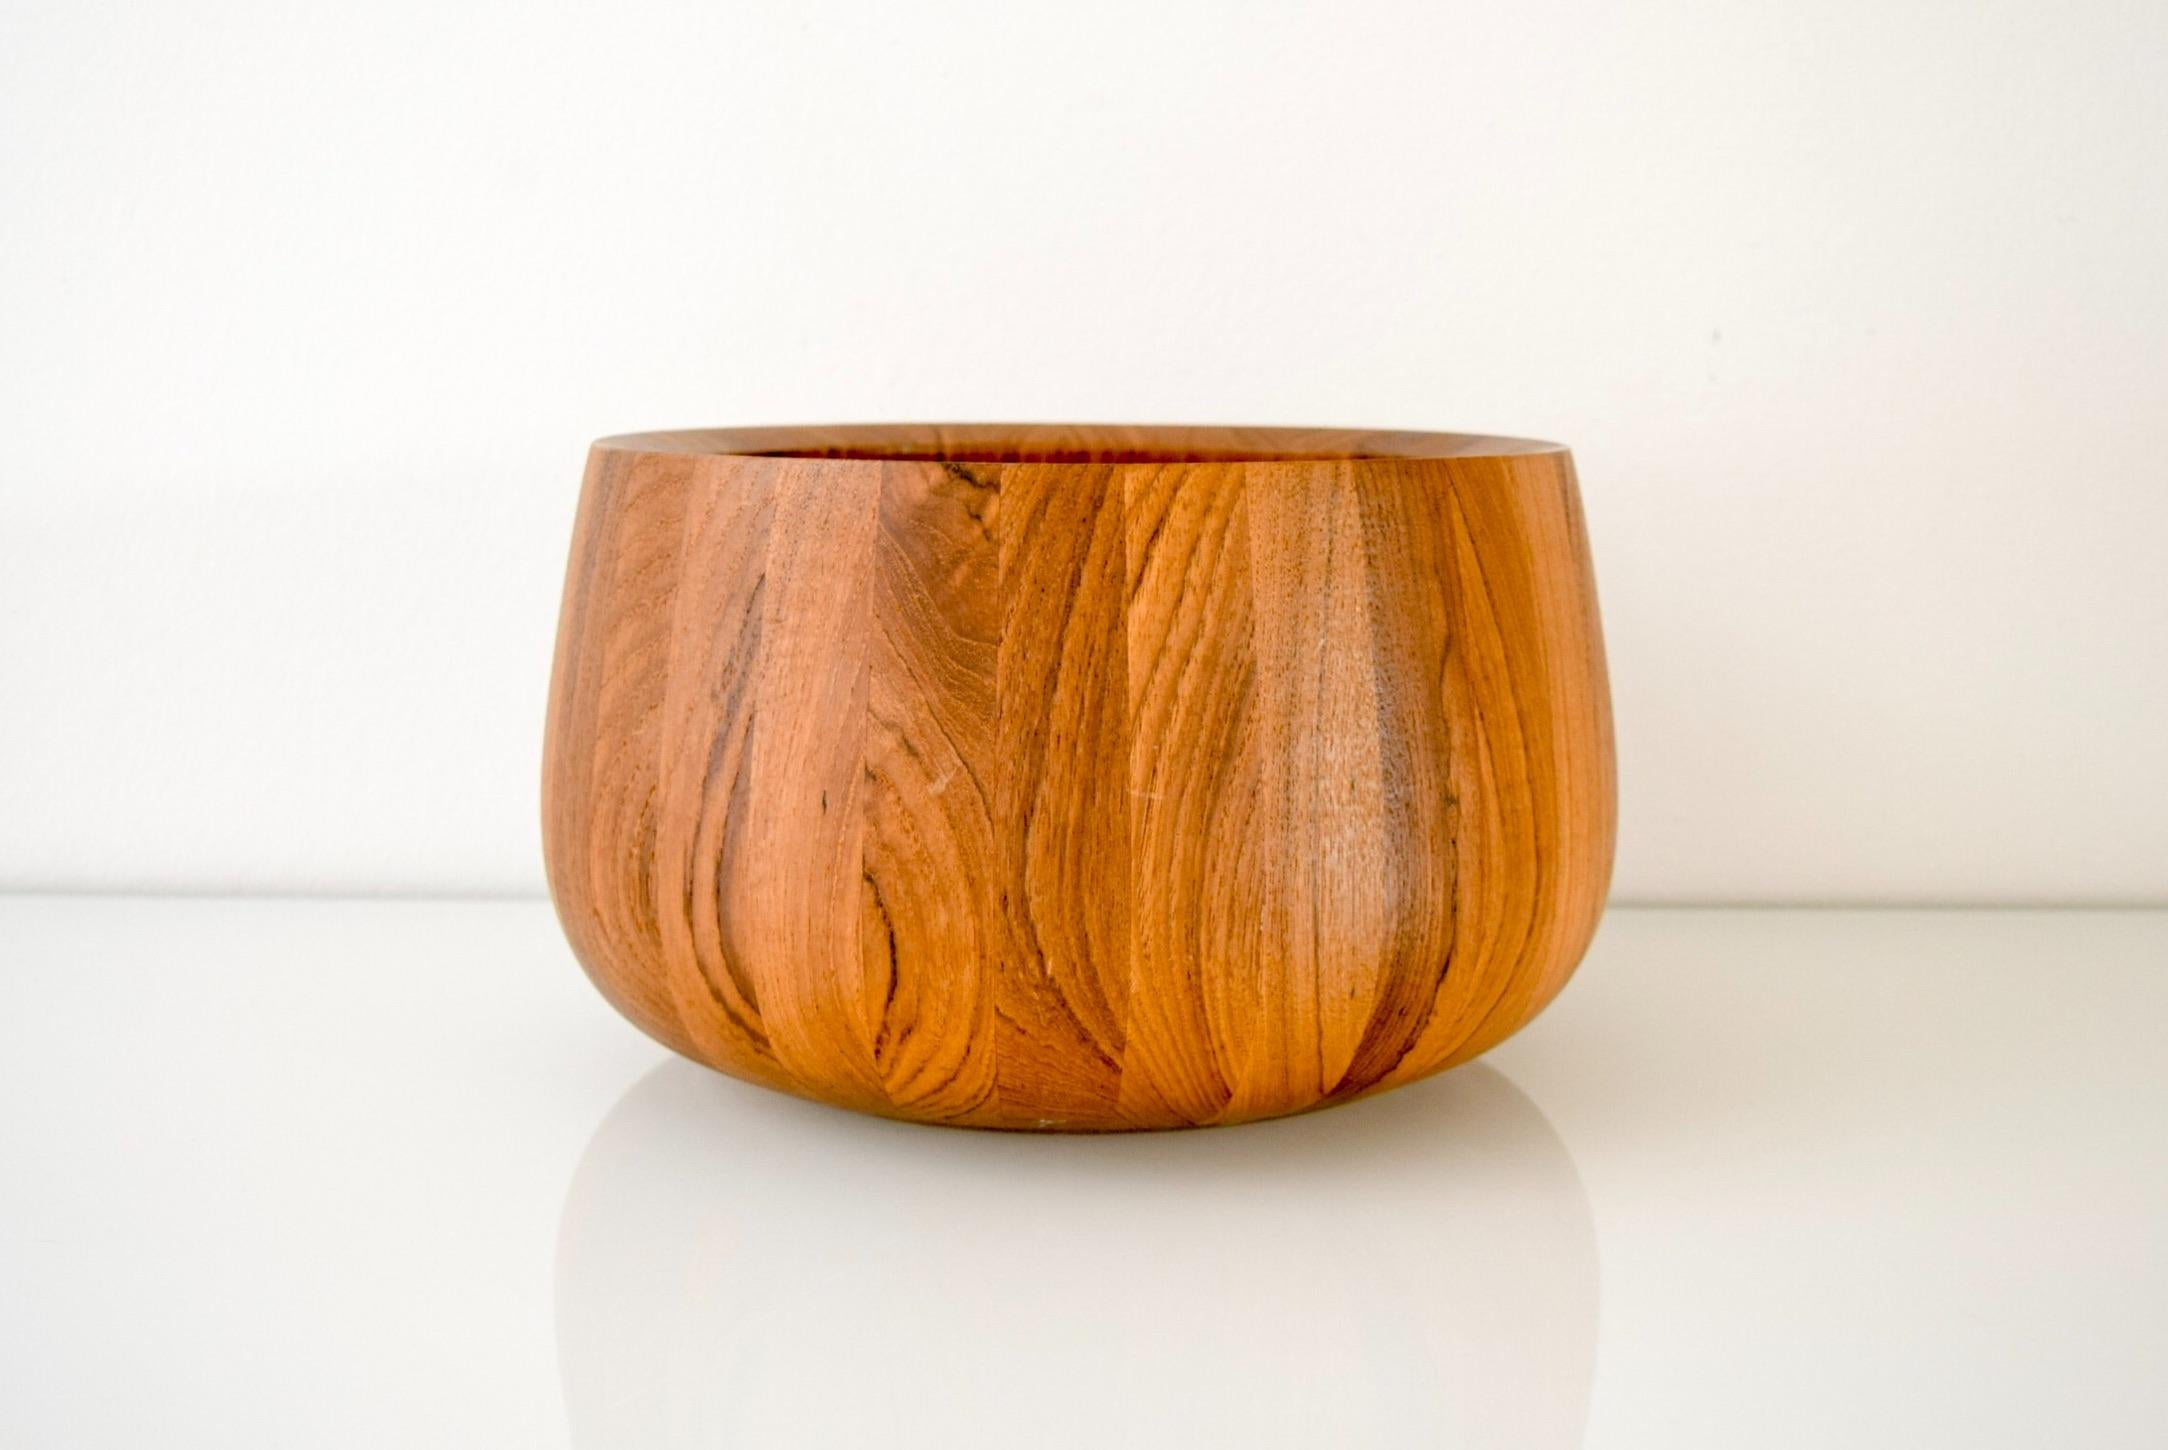 This large vintage midcentury Danish modern Dansk walnut wood fruit bowl is circa 1960. It is made from thick solid staved walnut with gorgeous grain and features a simple, elegant design with tall sides that angle in slightly to create a beautiful